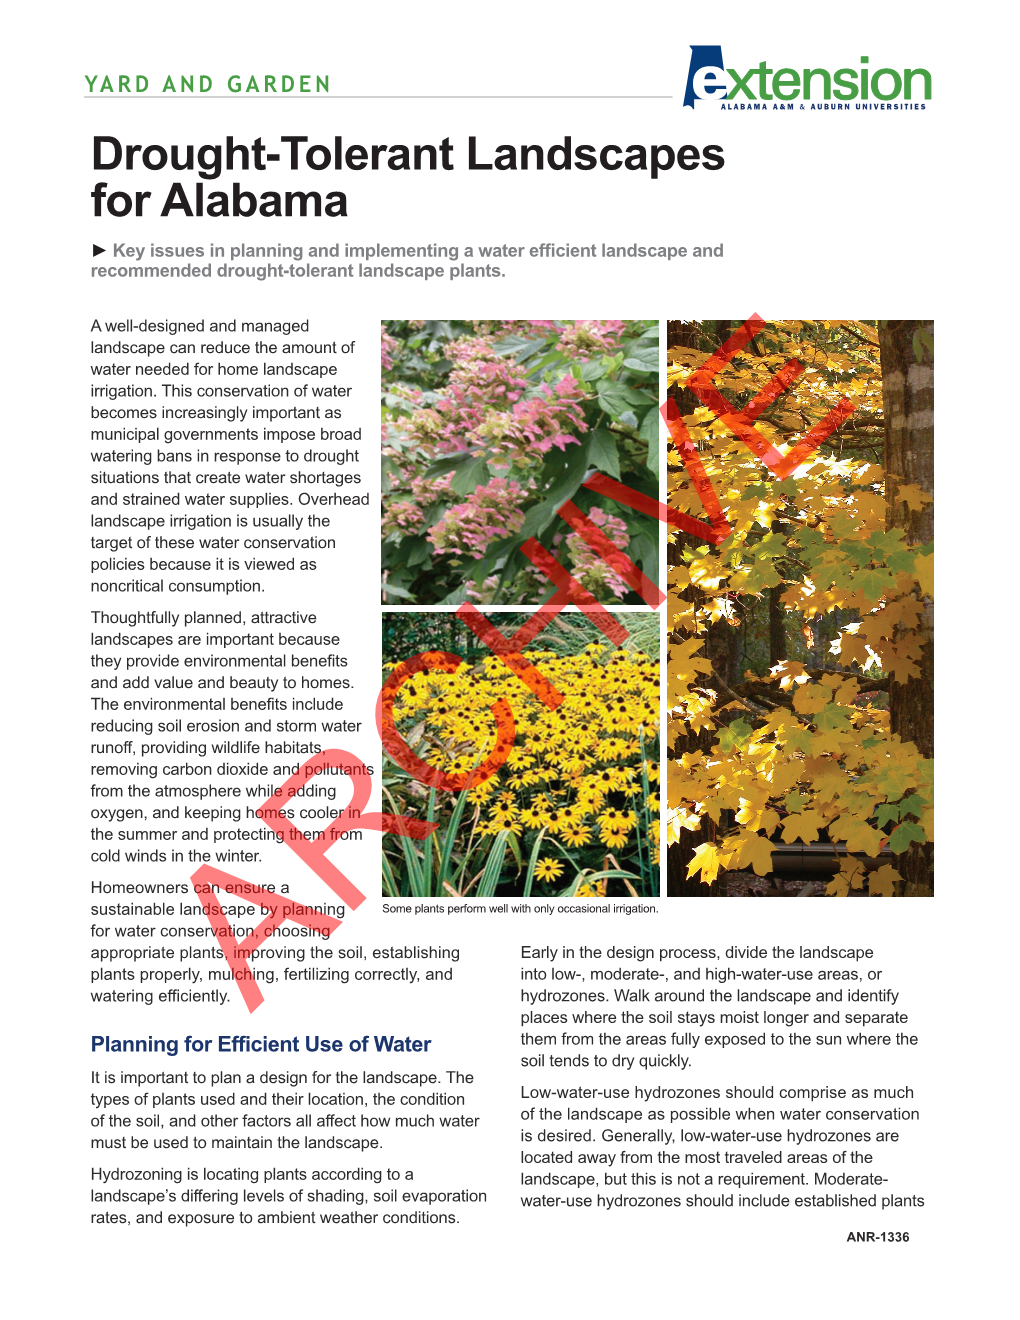 Drought-Tolerant Landscapes for Alabama ► Key Issues in Planning and Implementing a Water Efficient Landscape and Recommended Drought-Tolerant Landscape Plants